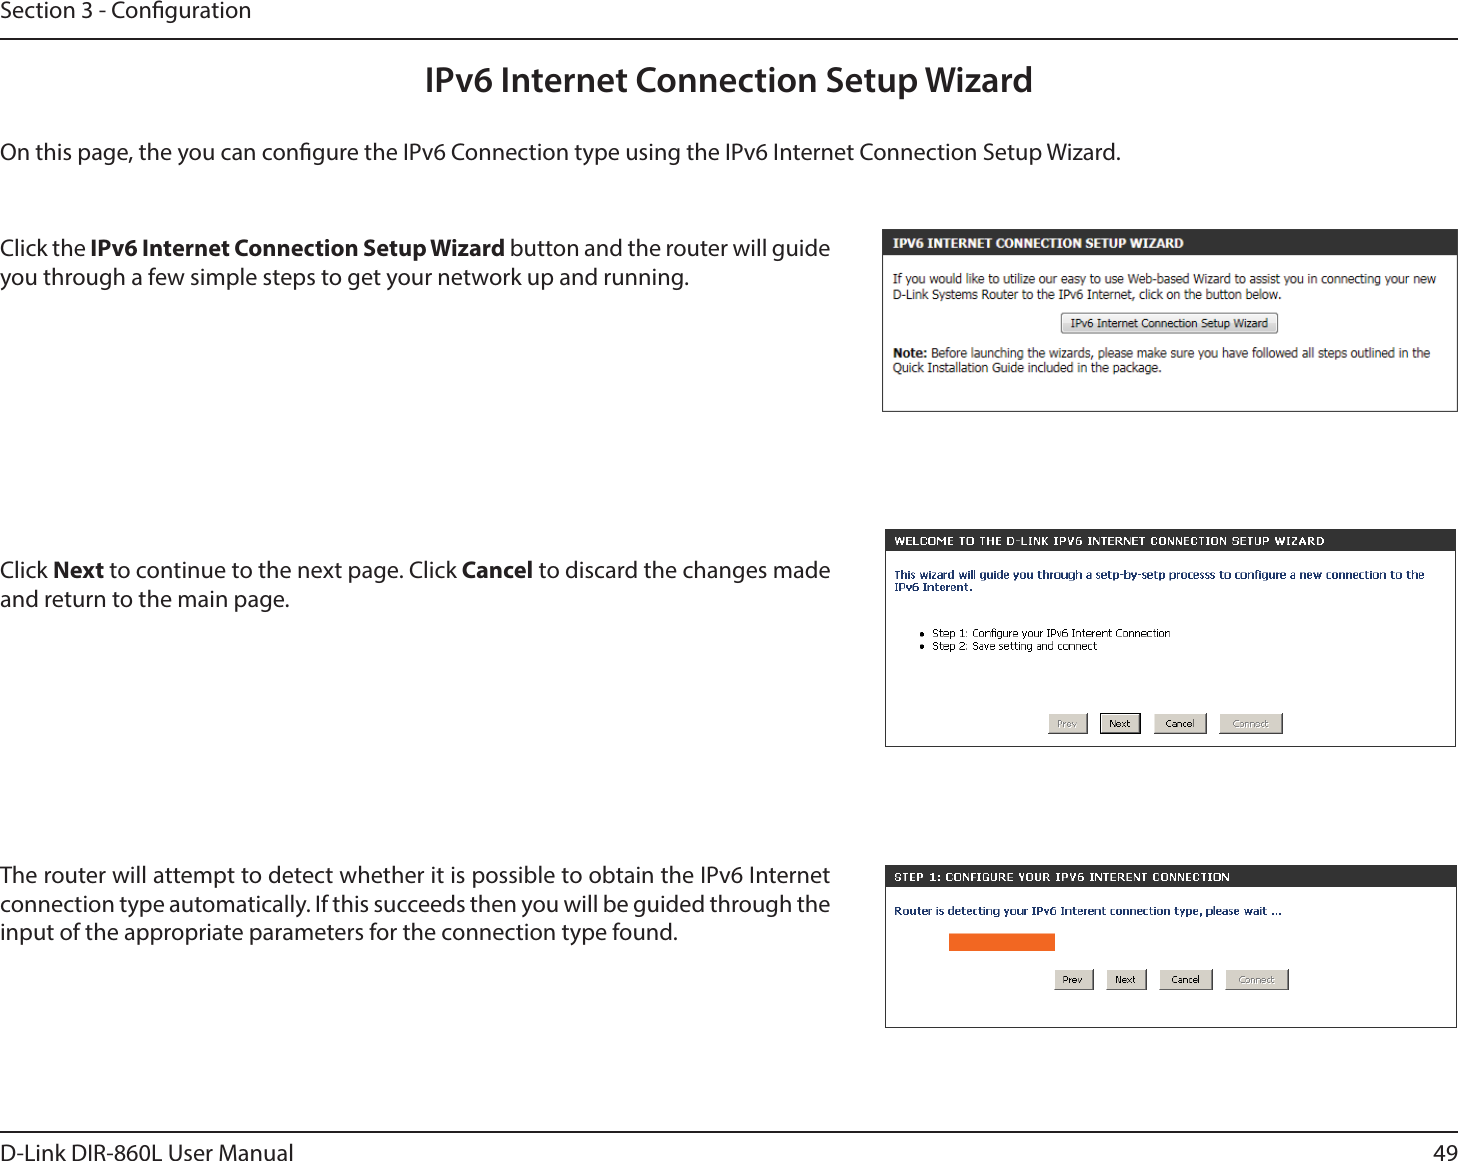 49D-Link DIR-860L User ManualSection 3 - CongurationIPv6 Internet Connection Setup WizardOn this page, the you can congure the IPv6 Connection type using the IPv6 Internet Connection Setup Wizard.Click the *1W*OUFSOFU$POOFDUJPO4FUVQ8J[BSE button and the router will guide you through a few simple steps to get your network up and running.Click Next to continue to the next page. Click Cancel to discard the changes made and return to the main page.The router will attempt to detect whether it is possible to obtain the IPv6 Internet connection type automatically. If this succeeds then you will be guided through the input of the appropriate parameters for the connection type found.